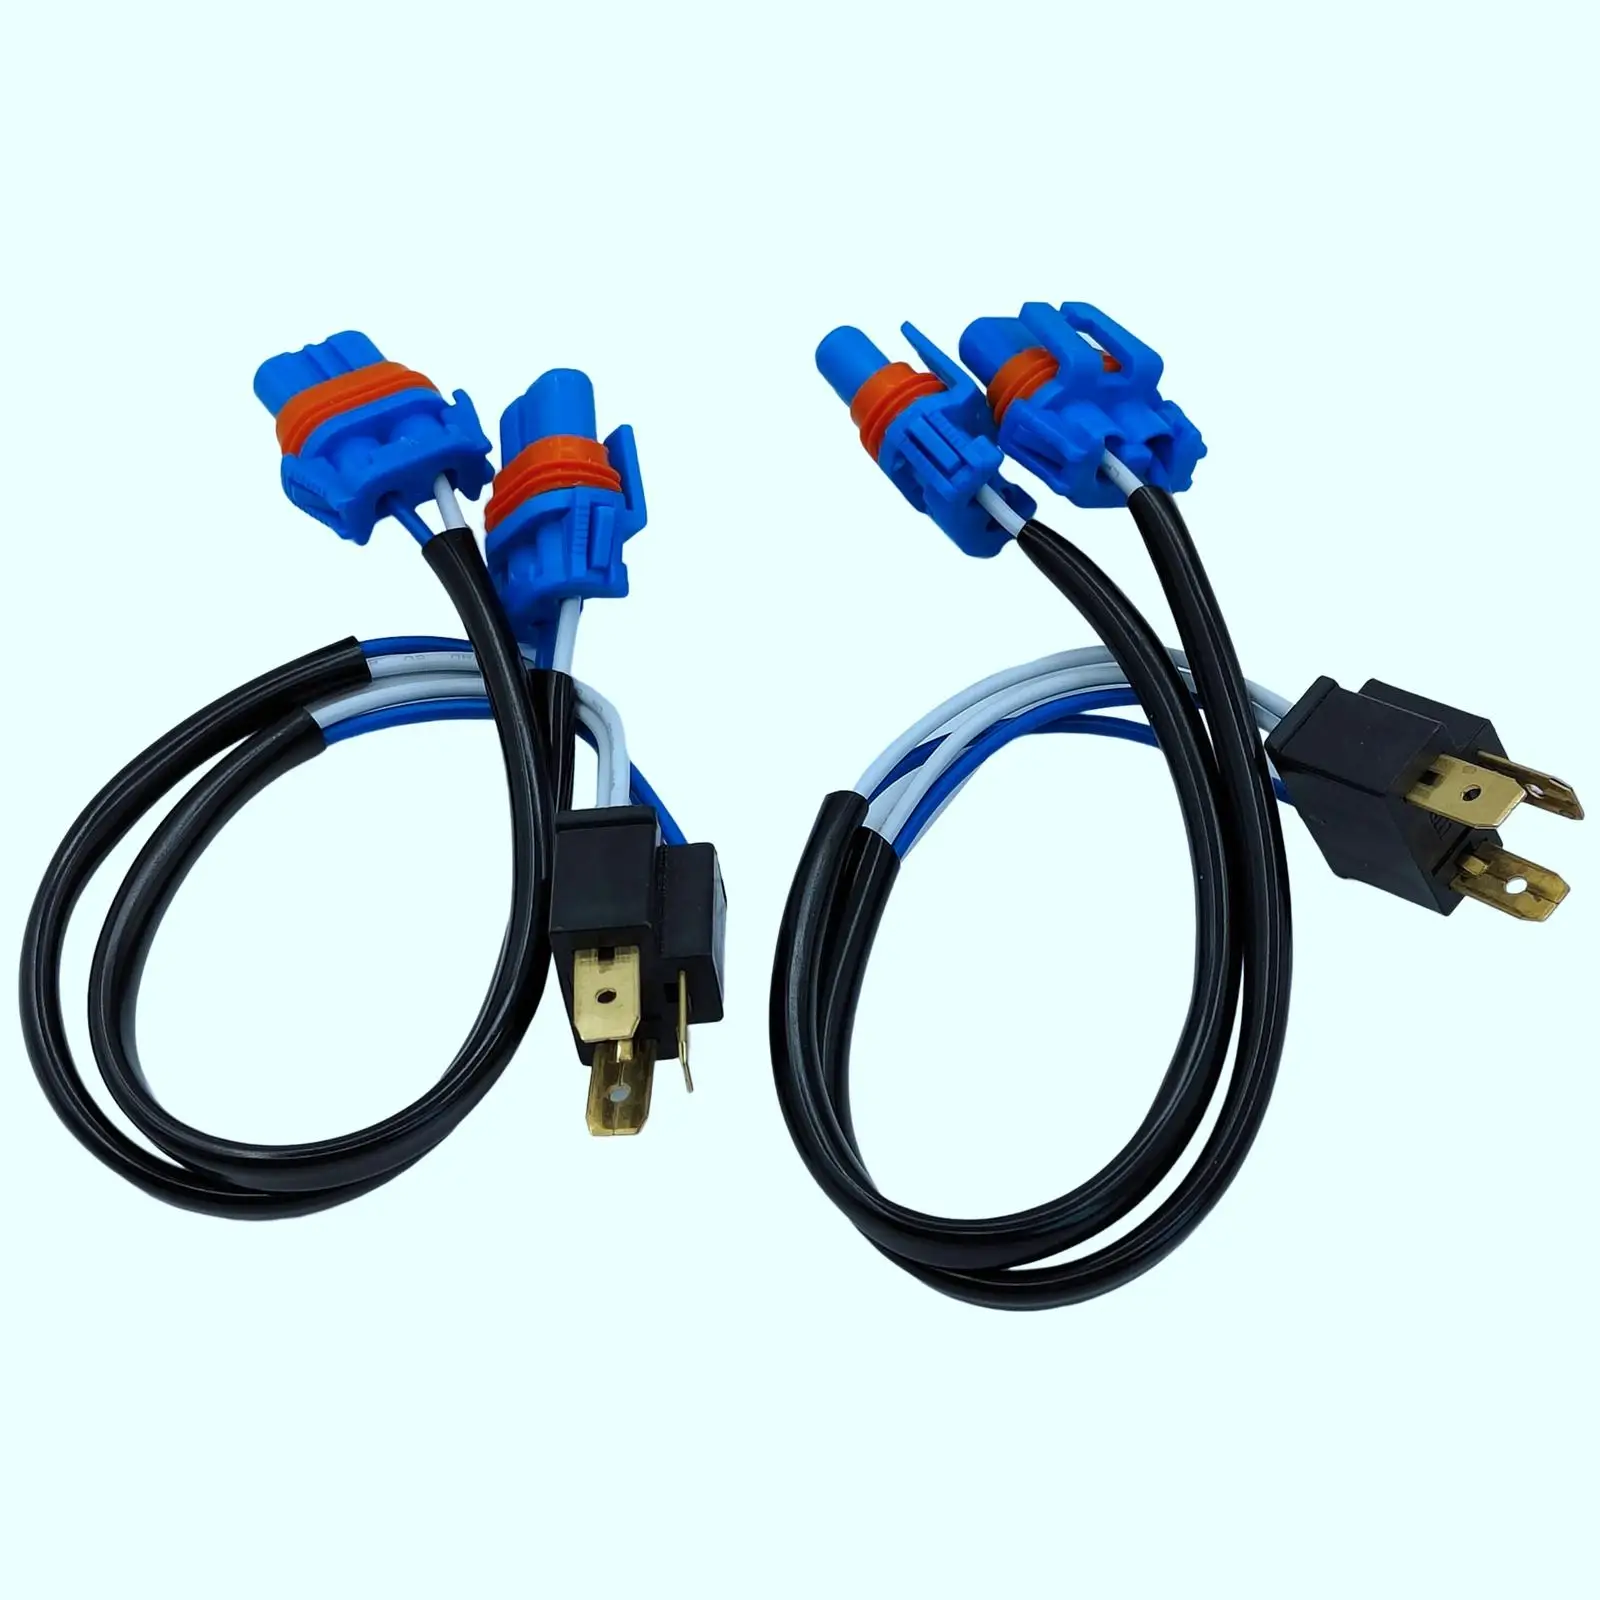 H4 to 9006 / 9005 Headlight Bulb Conversion Sockets Harness 100W Adapter Wiring Plug and Play Fit for SUV Truck Van Car